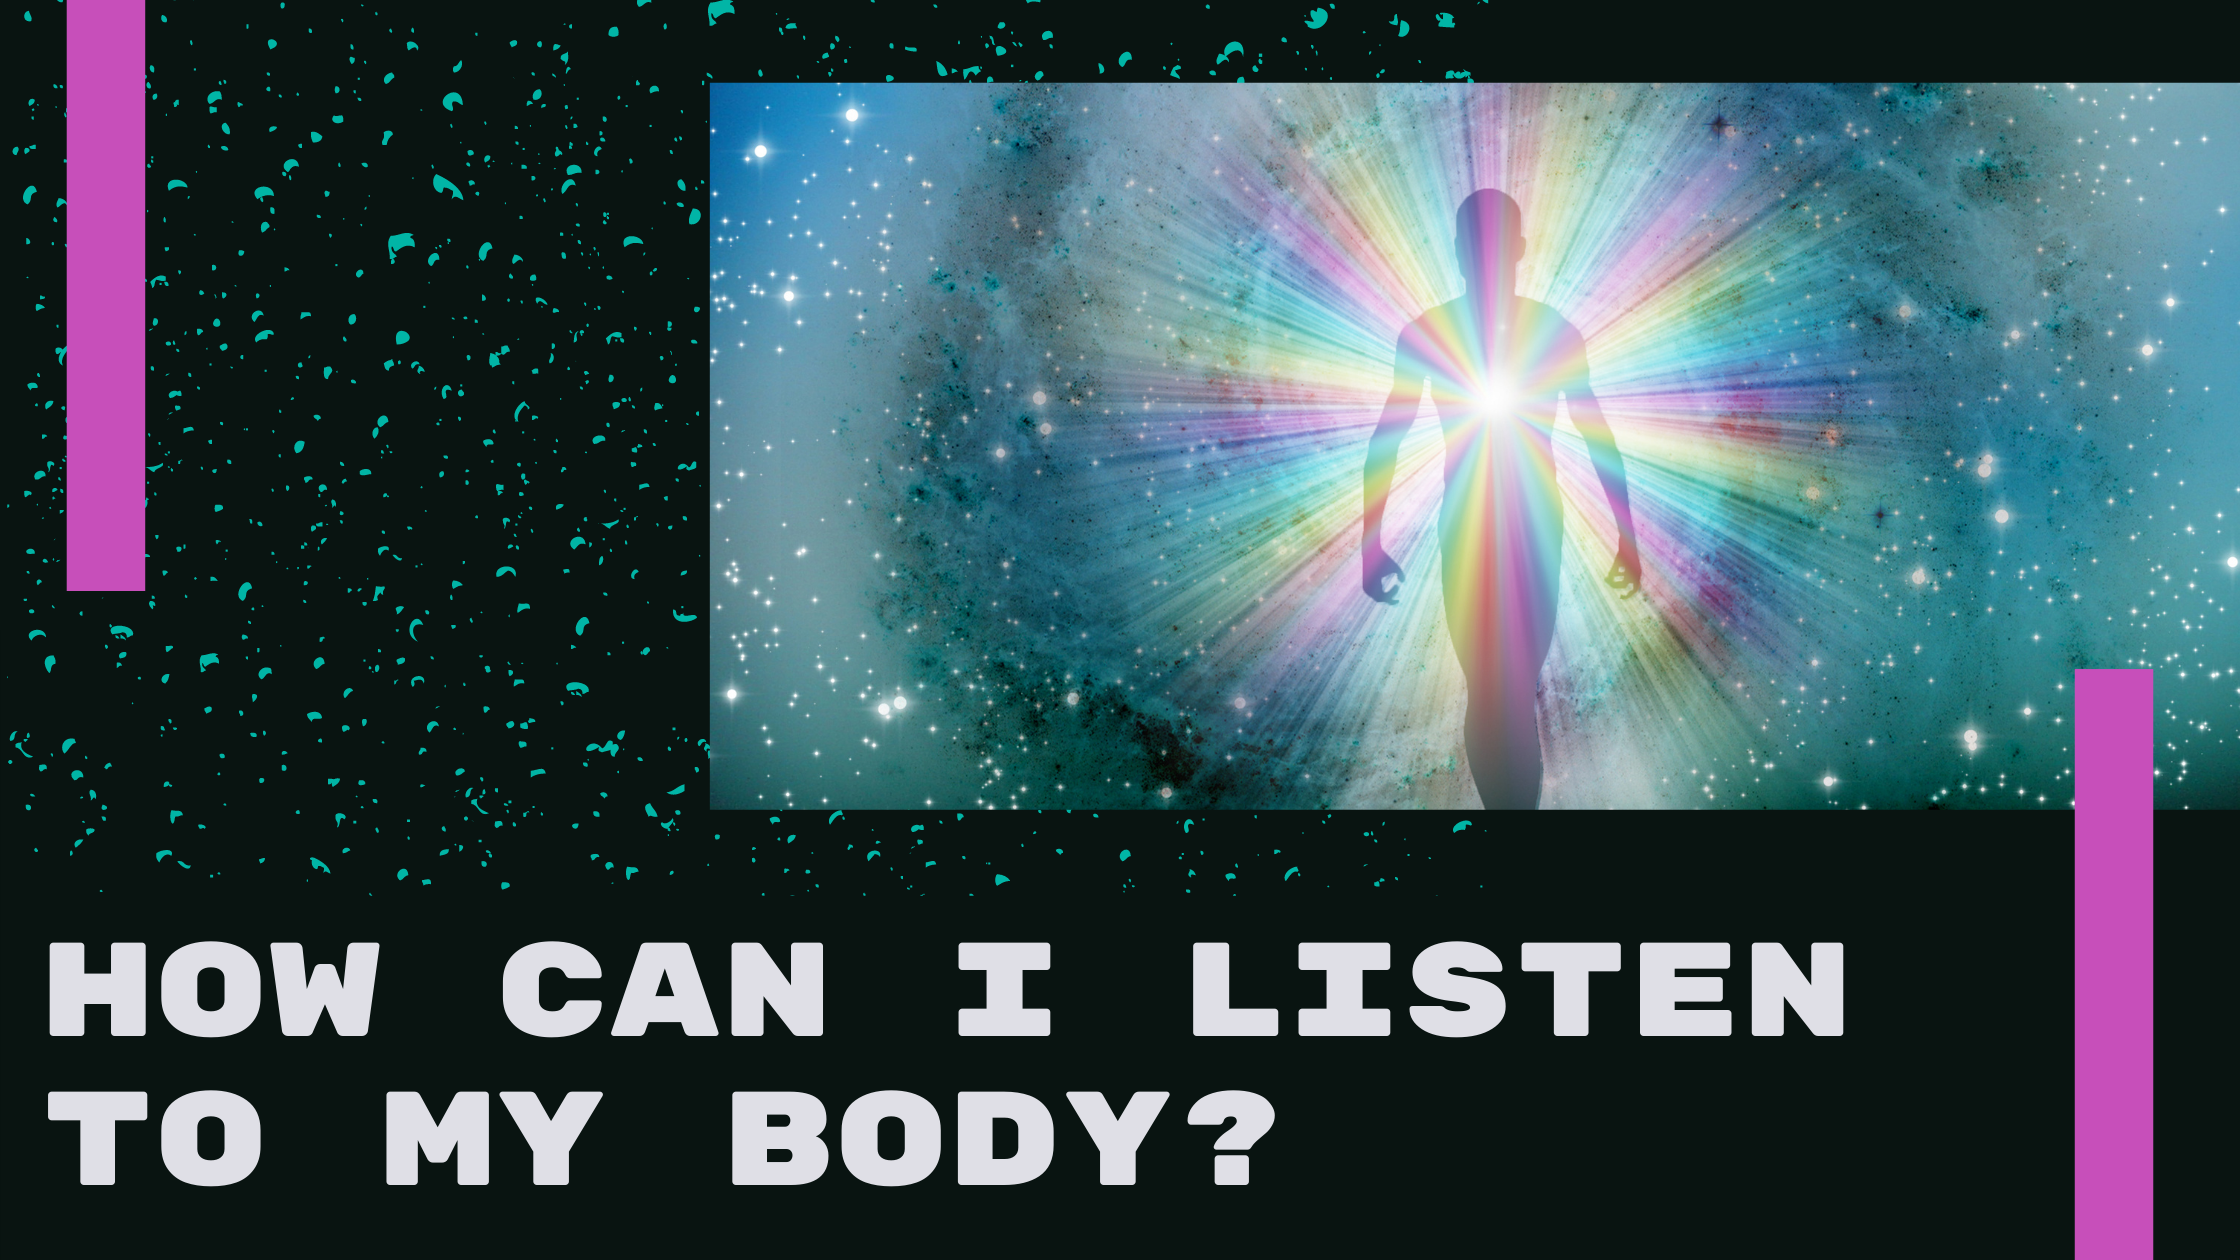 How can I listen to my body?